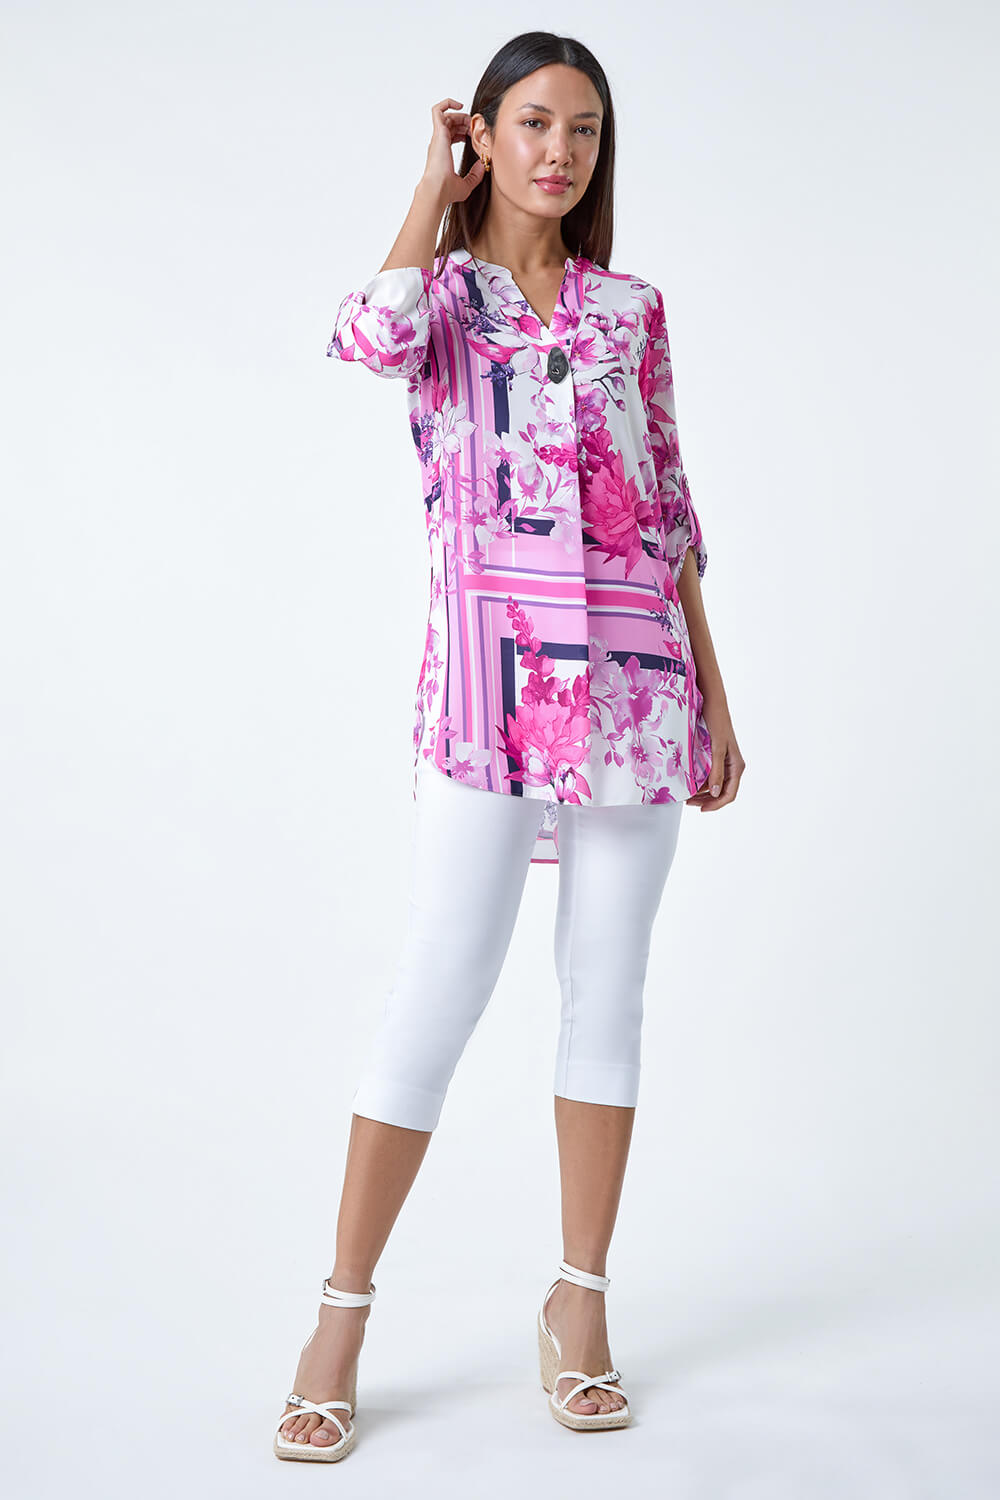 PINK Floral Patchwork Longline Button Detail Top, Image 4 of 5